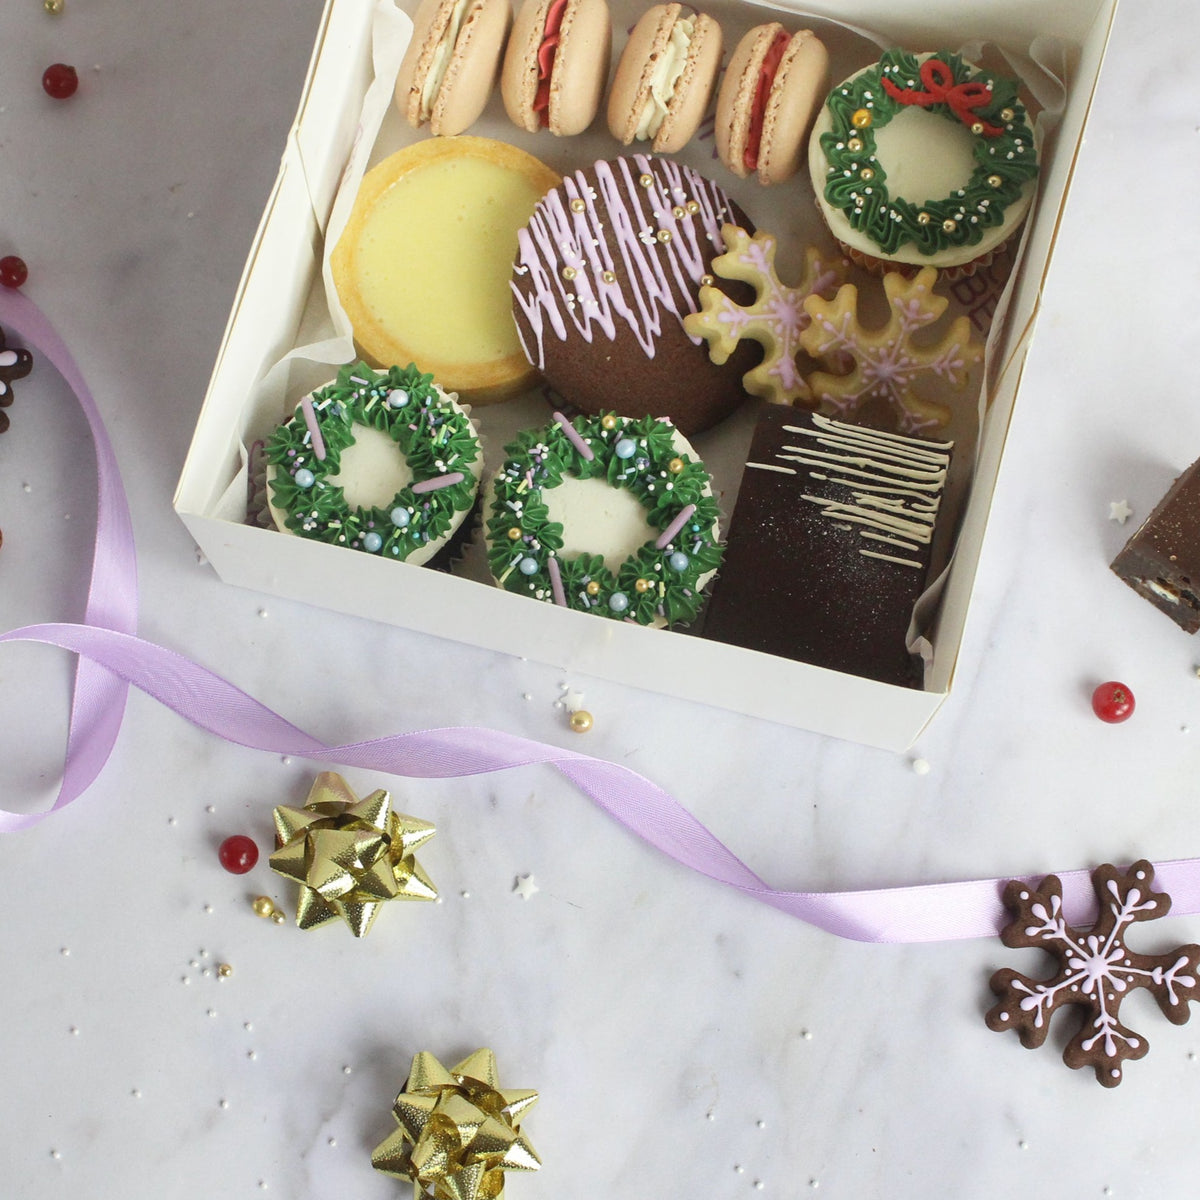 Add-on treat box of our daily festive sweets